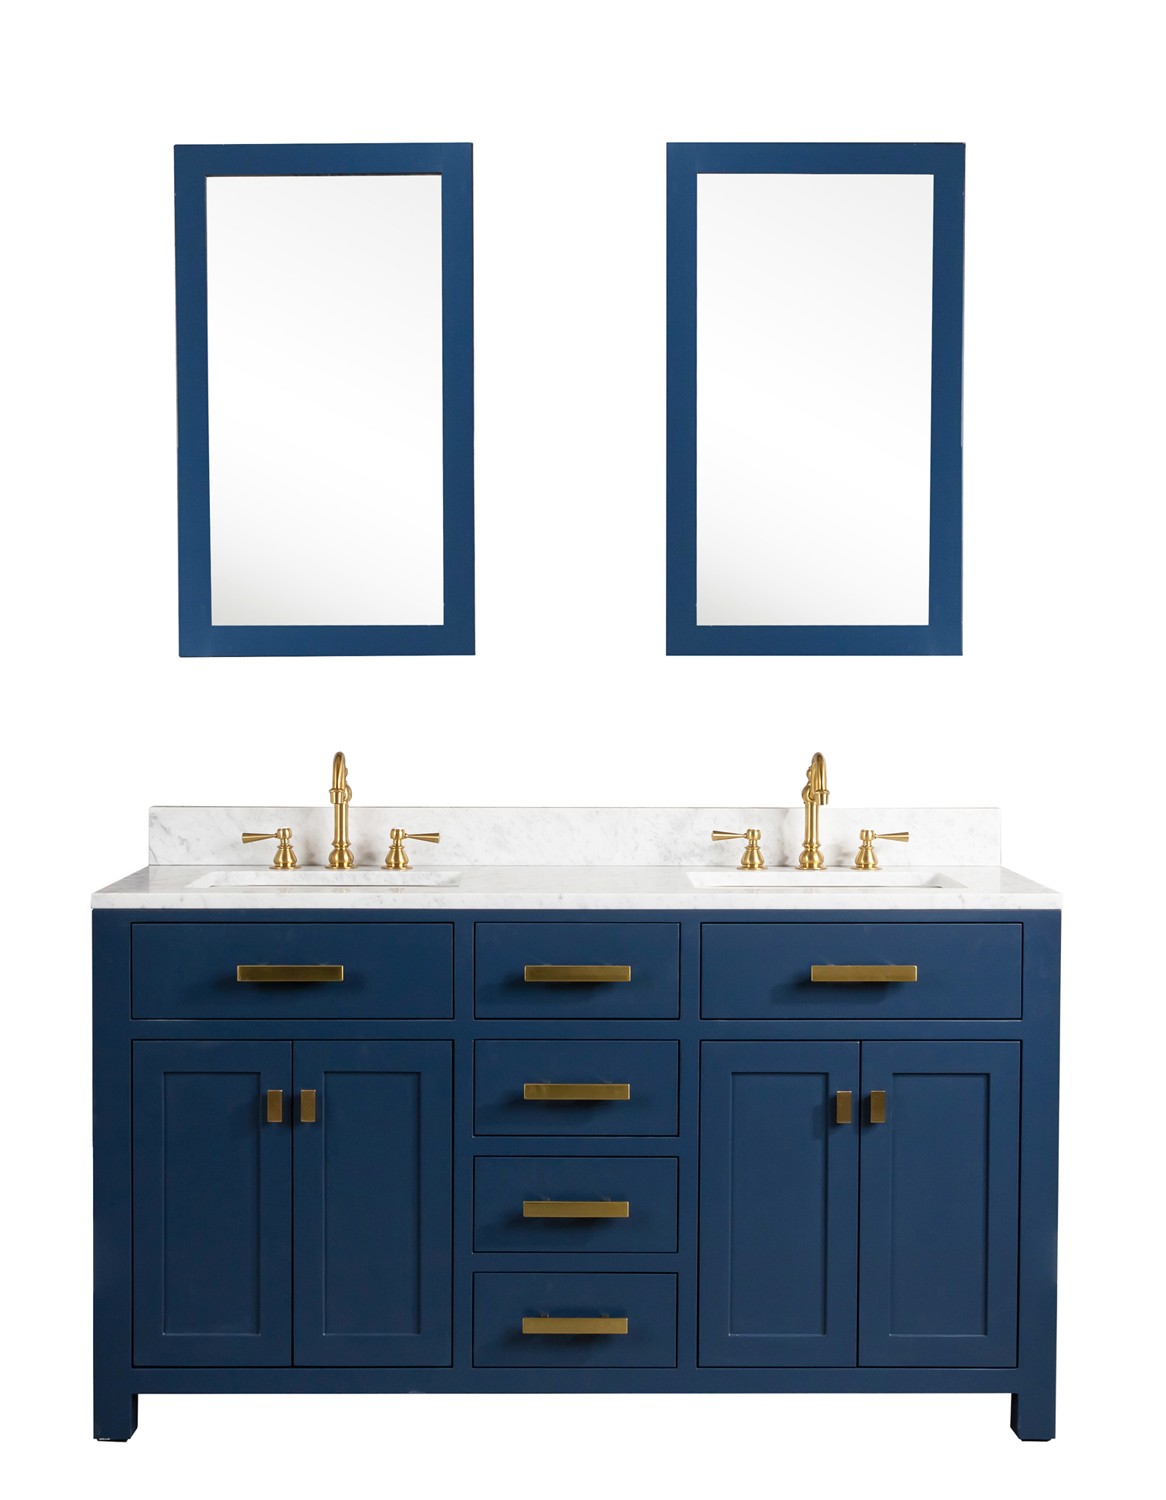 Madison 60-Inch Double Sink Carrara White Marble Vanity In Monarch BlueWith Matching Mirror(s)